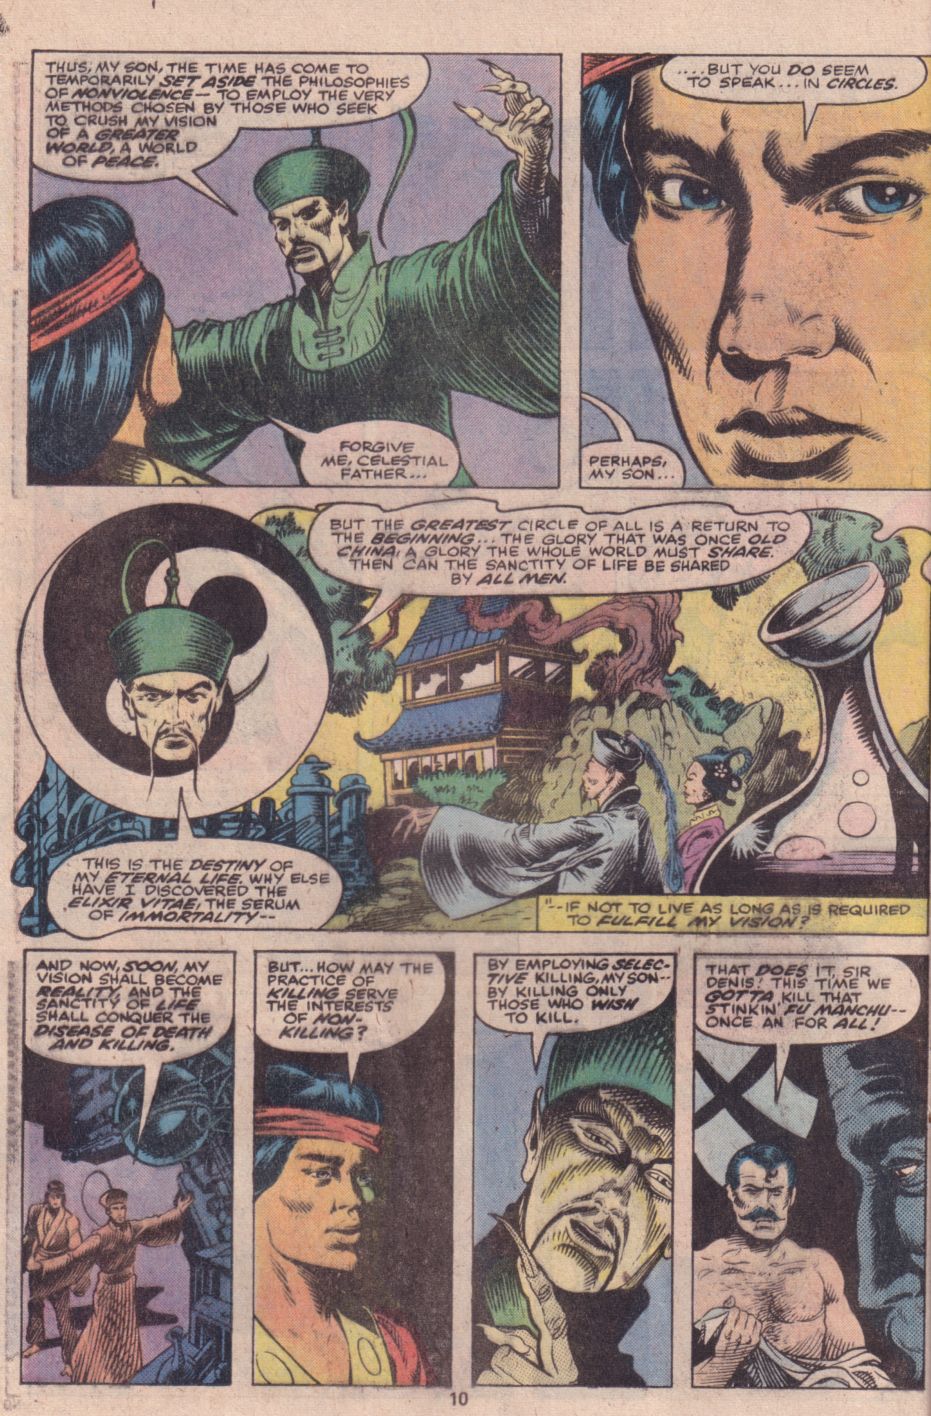 What If? (1977) issue 16 - Shang Chi Master of Kung Fu fought on The side of Fu Manchu - Page 9